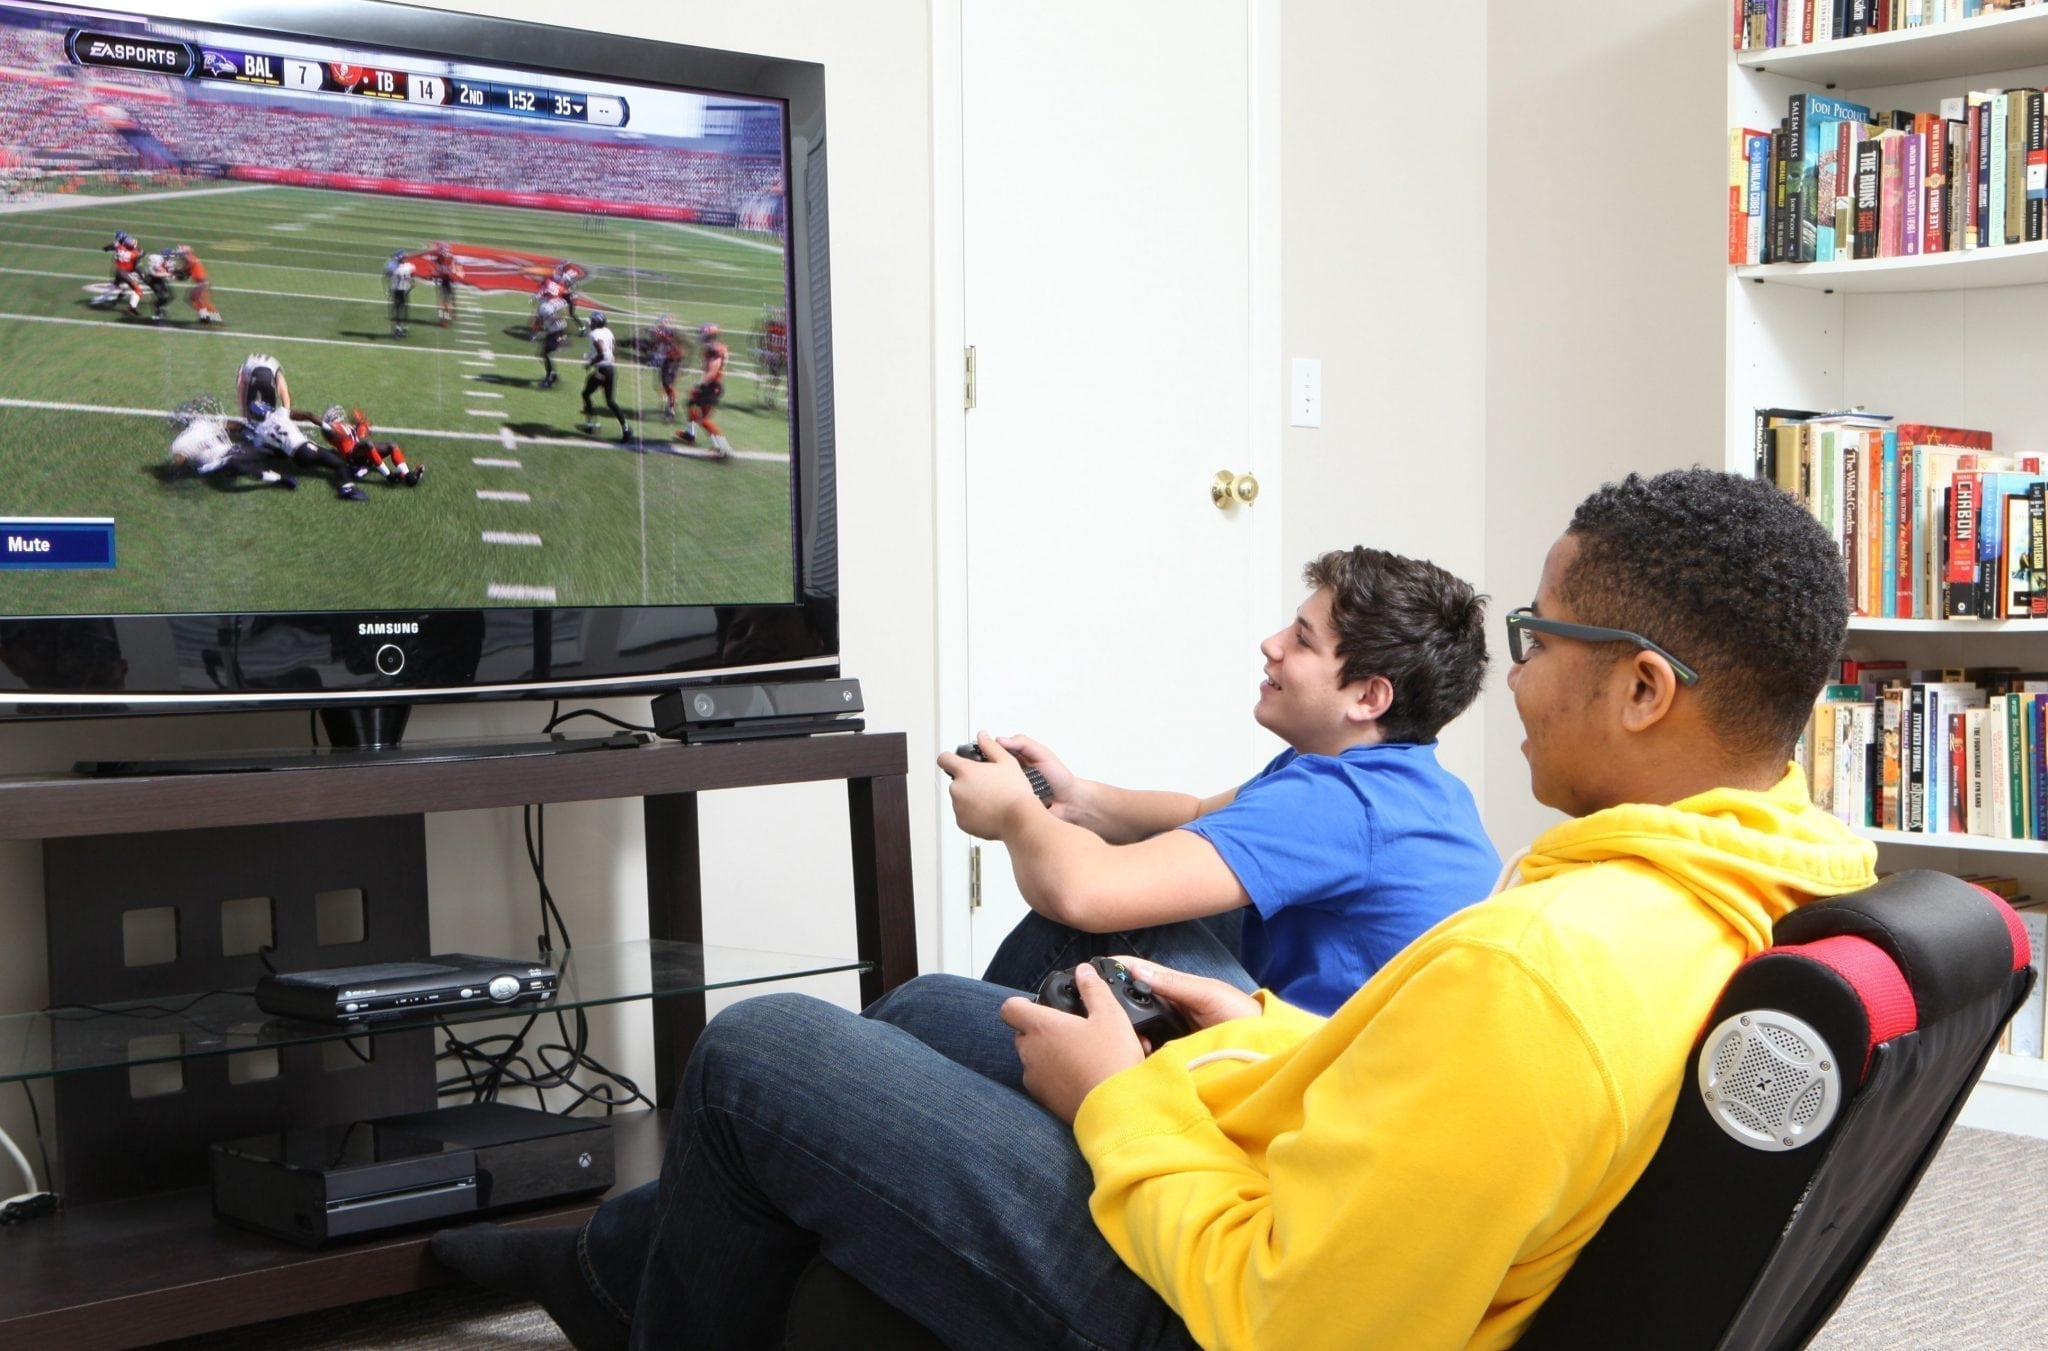 Effects Of Video Games On Teens: The Good, the Bad, the Useful